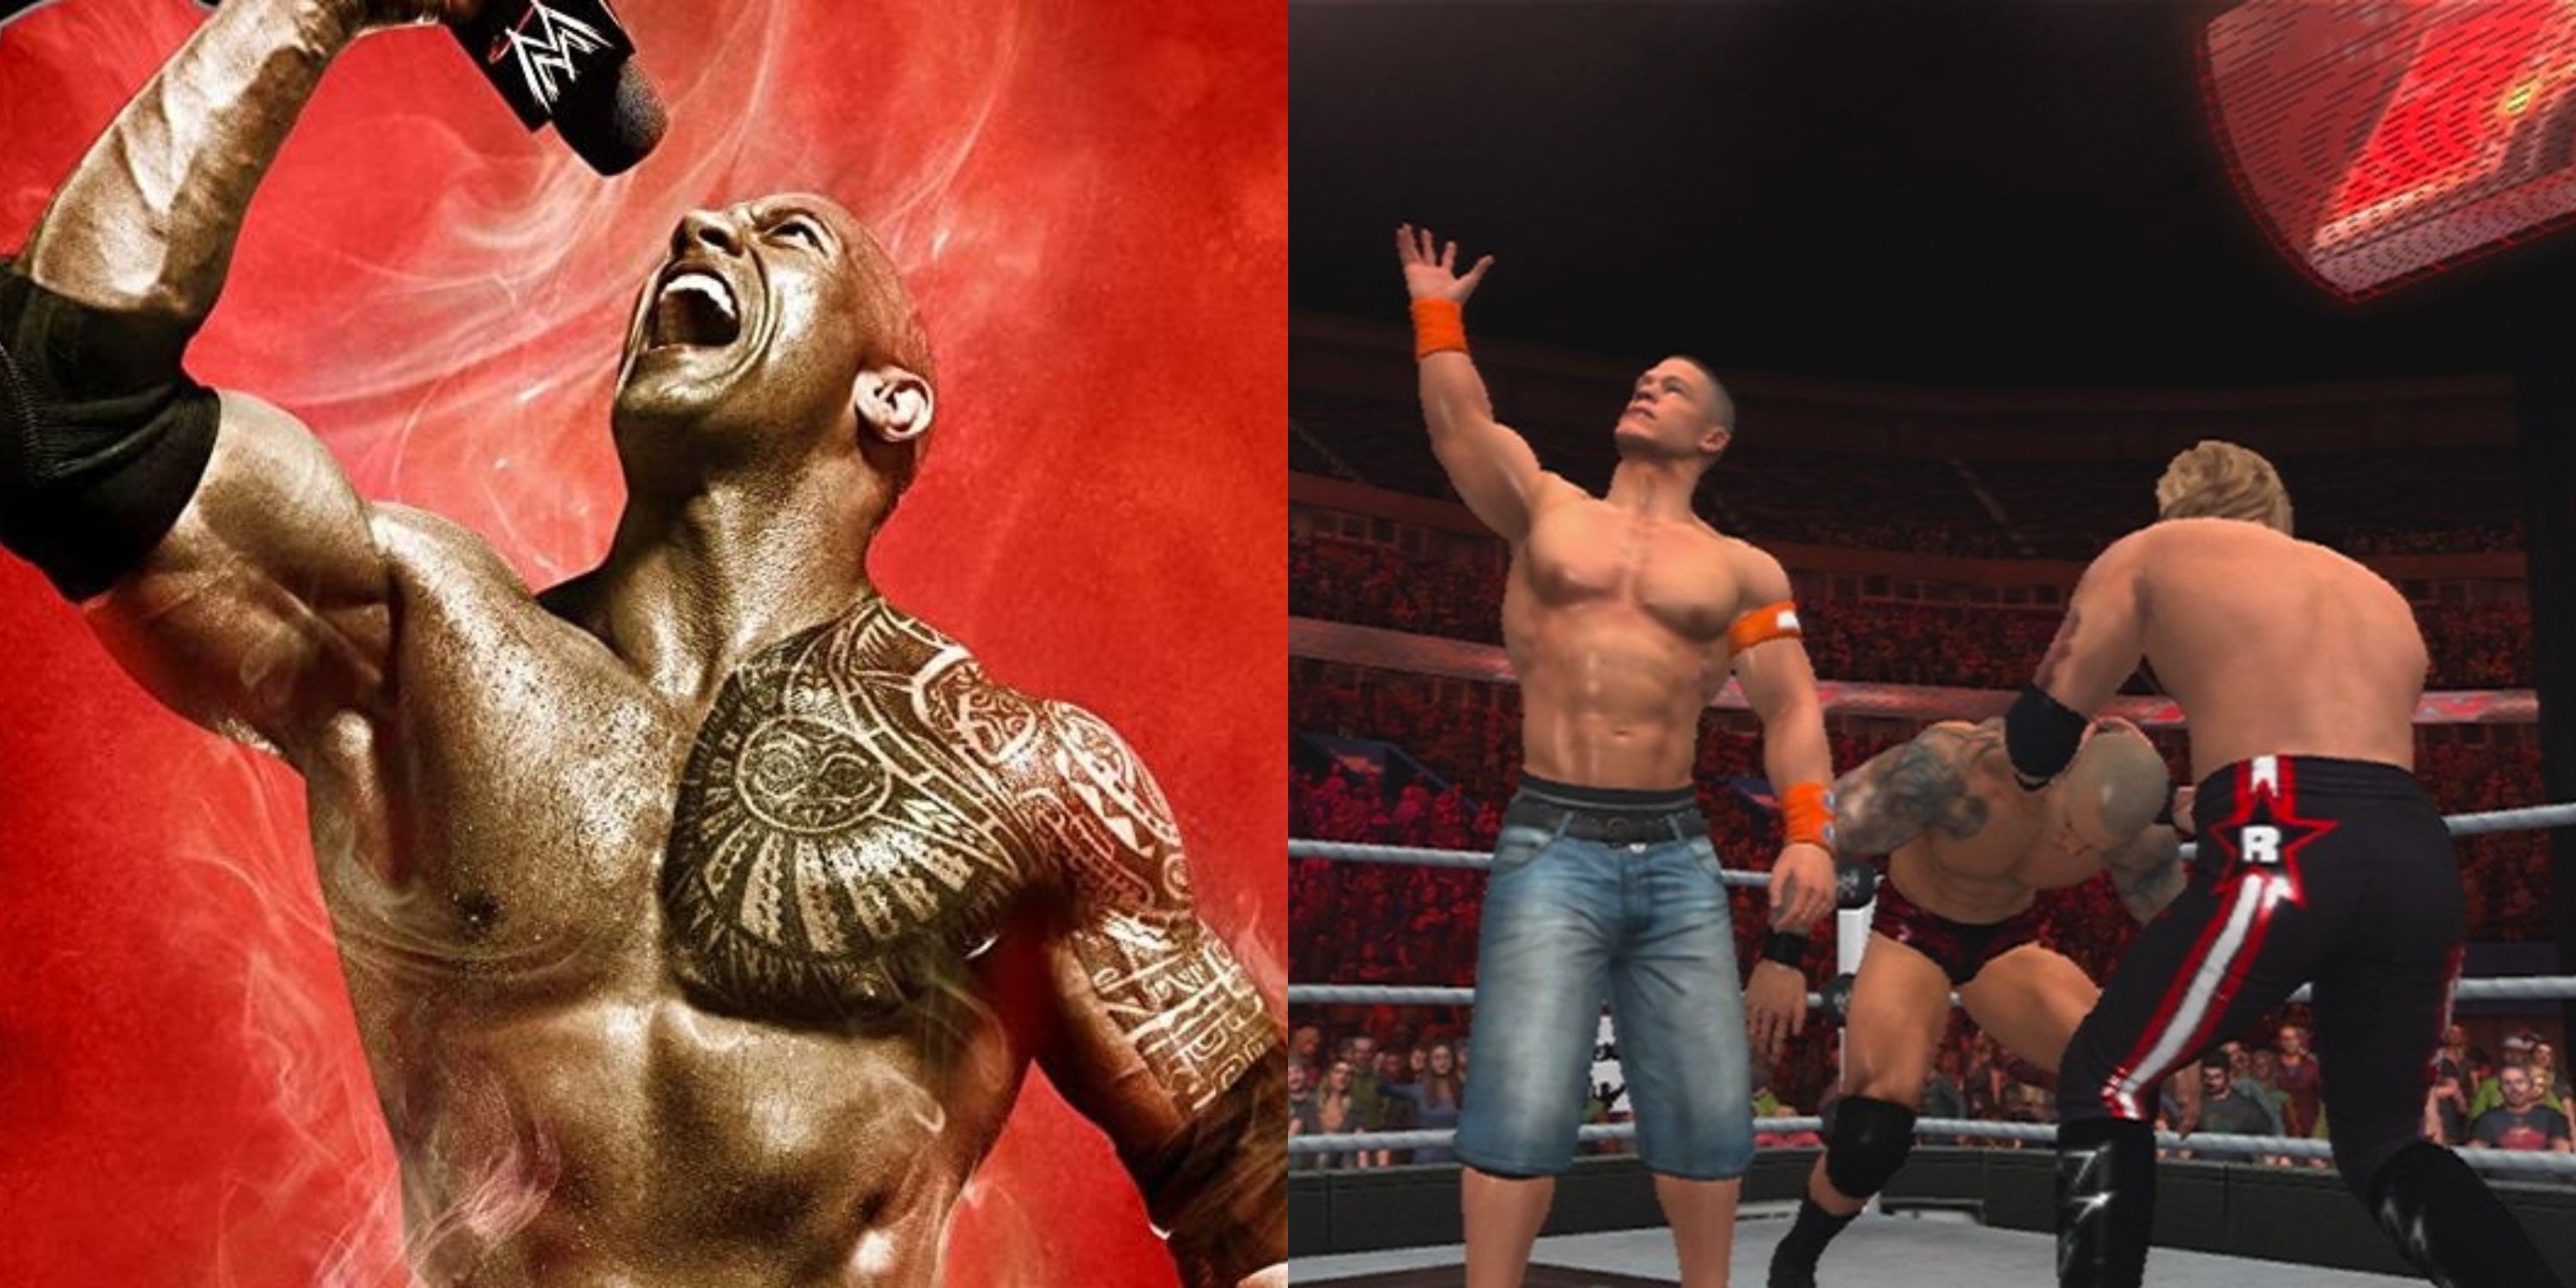 The 10 Best Wrestling Video Games Ever, According To Reddit